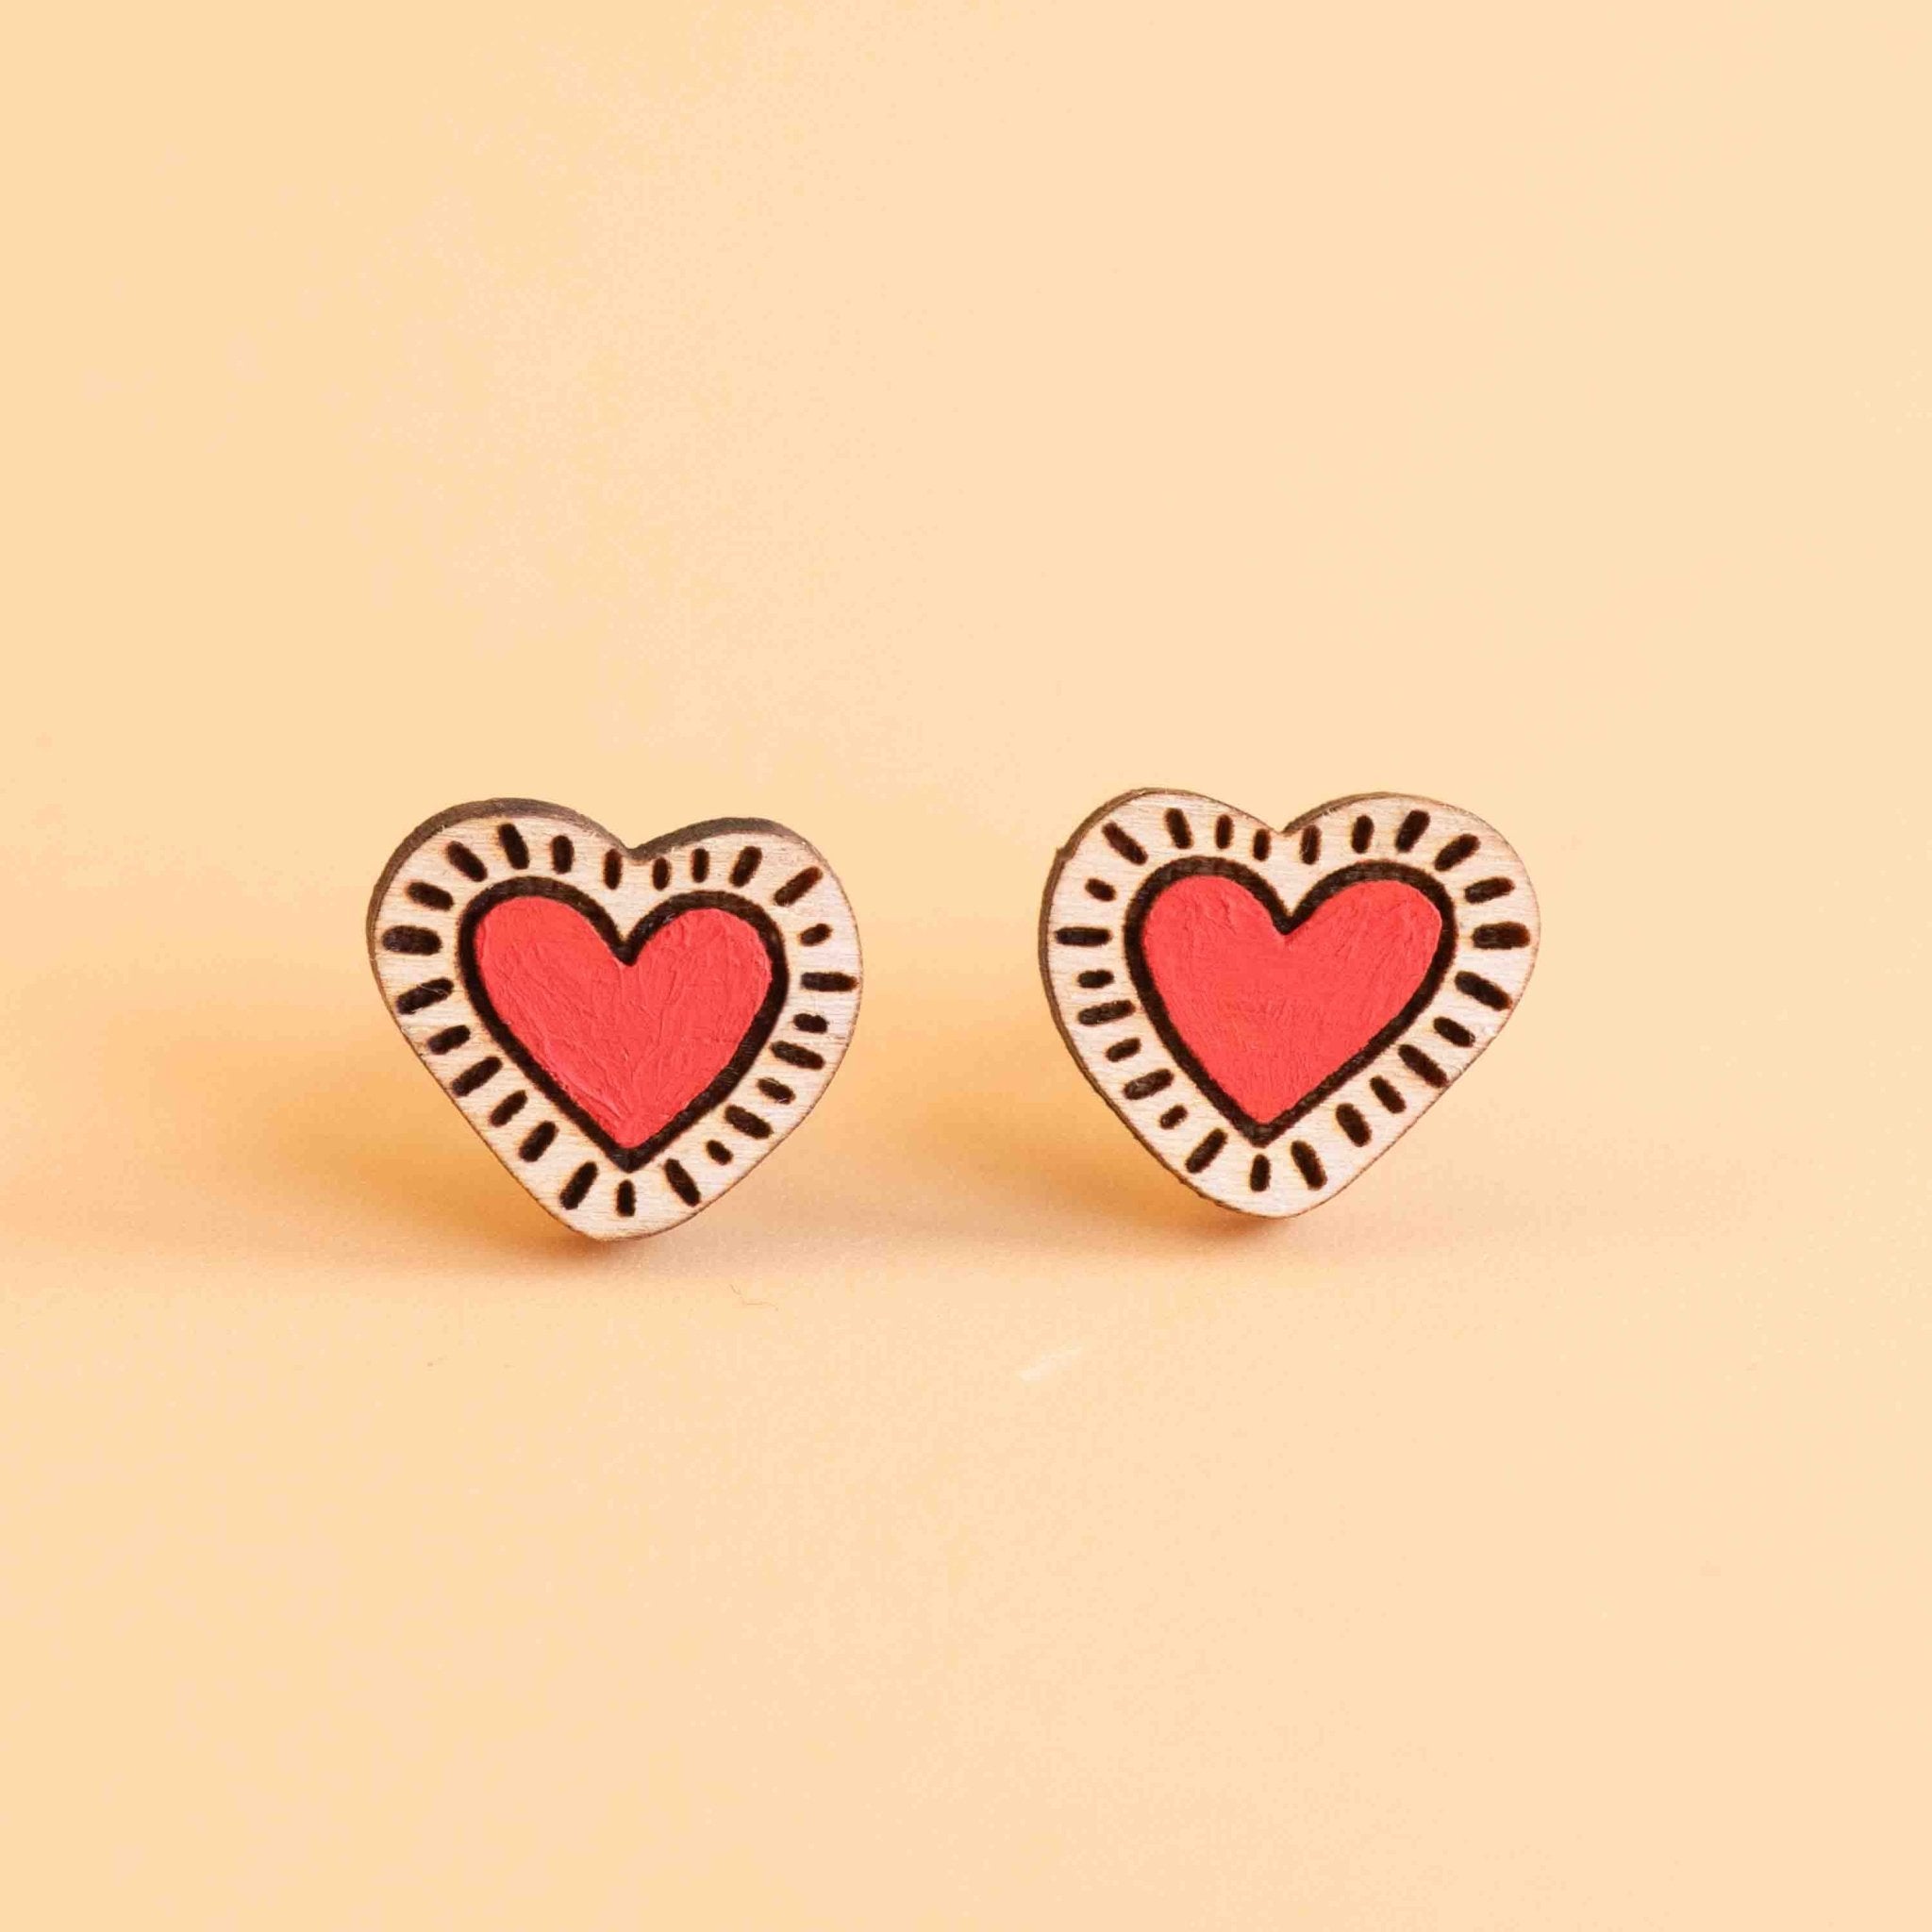 Hand-painted Love Heart Earrings Inspired by Keith Haring Eco-Jewellery - PET15123 - Robin Valley Official Store